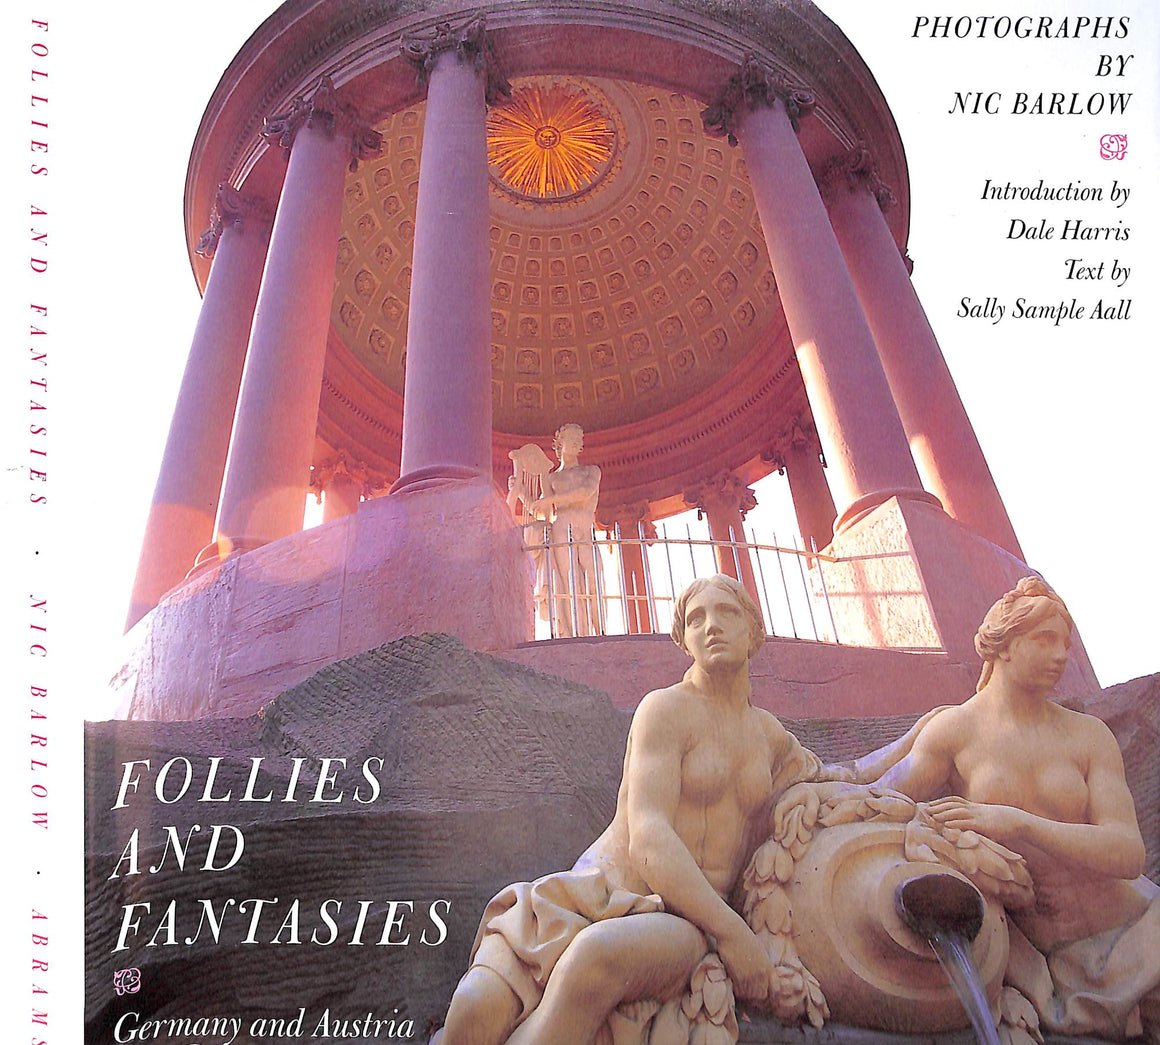 "Follies And Fantasies: Germany And Austria" 1994 AALL, Sally Sample [text by]